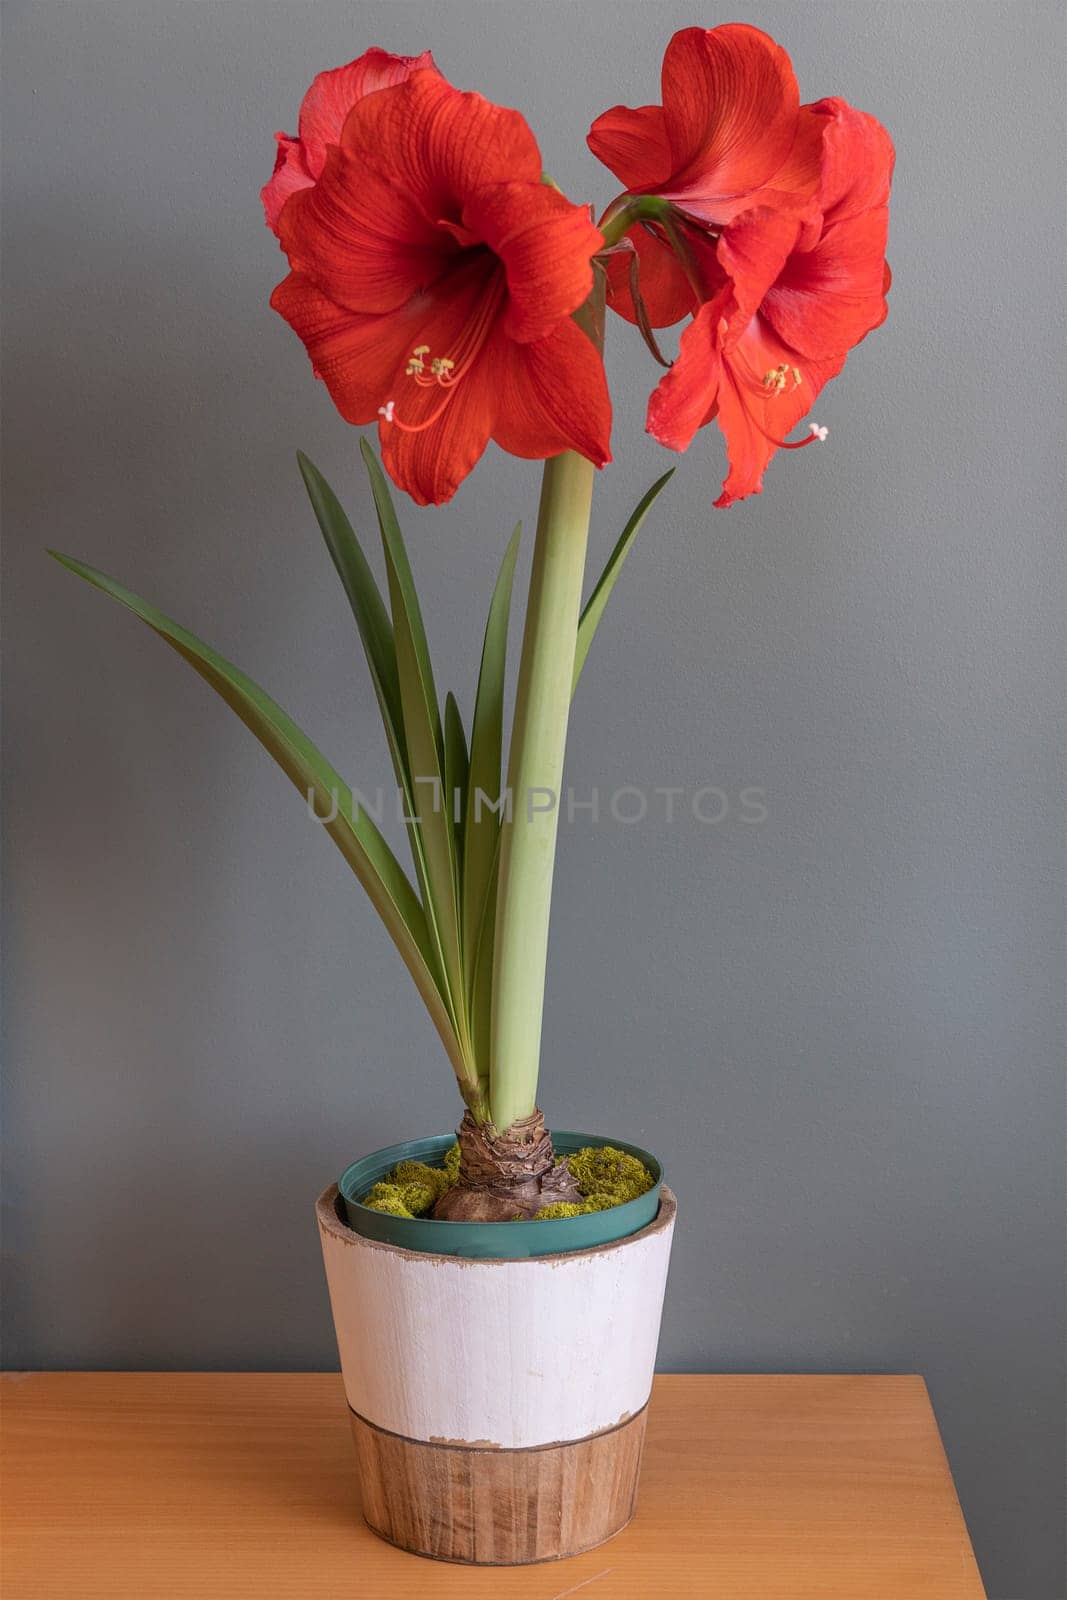 On the table is a pot with a beautiful, red amaryllis flower.